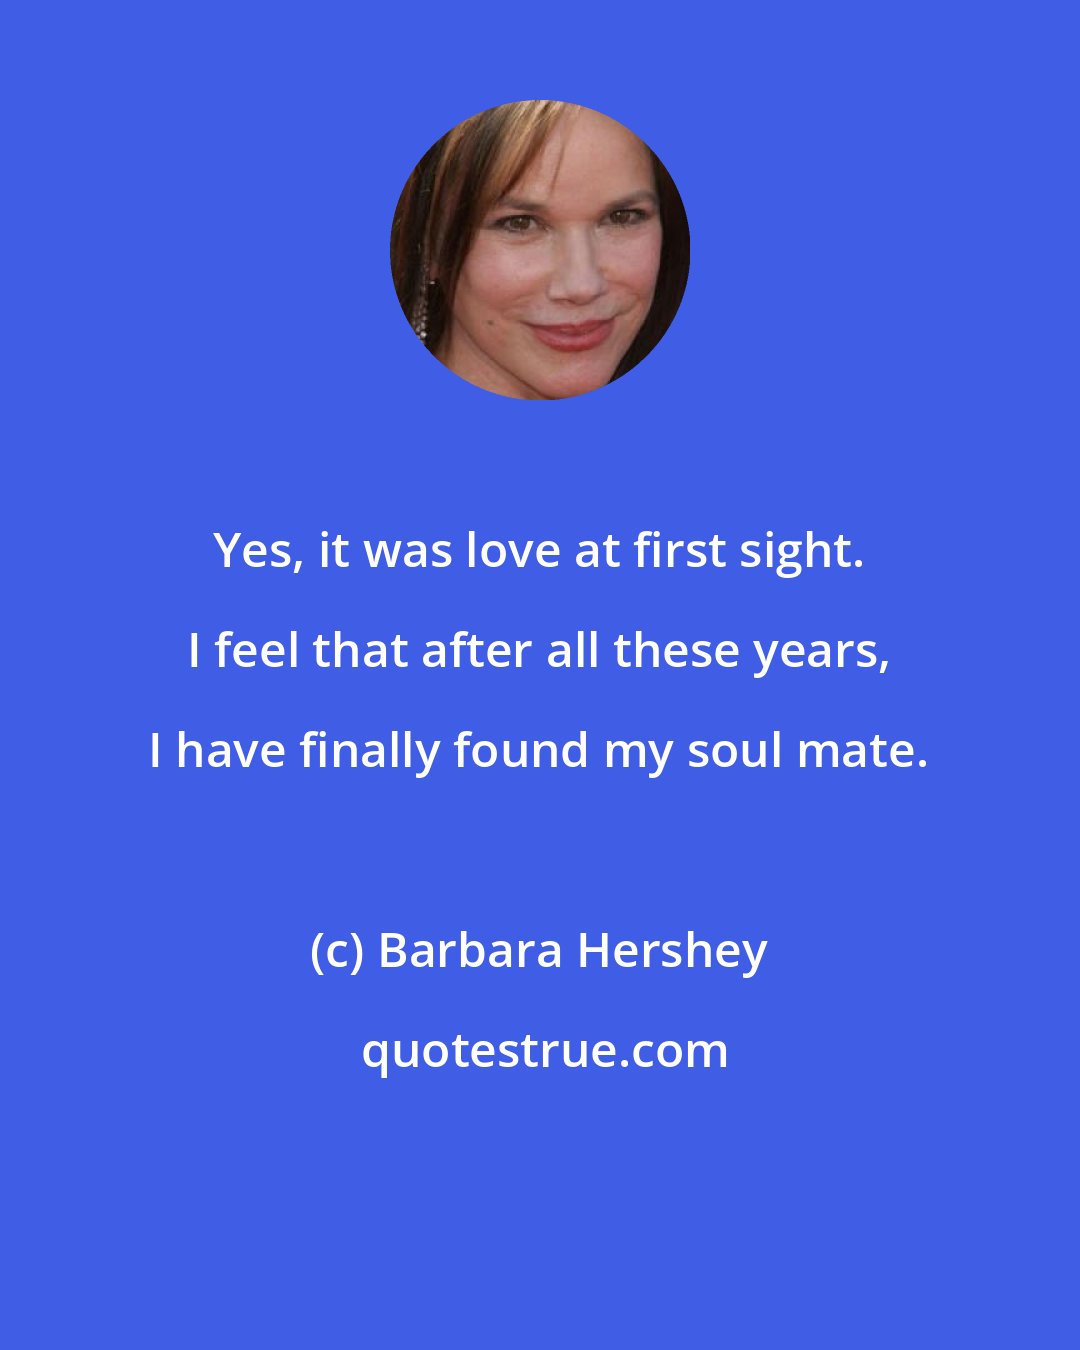 Barbara Hershey: Yes, it was love at first sight. I feel that after all these years, I have finally found my soul mate.